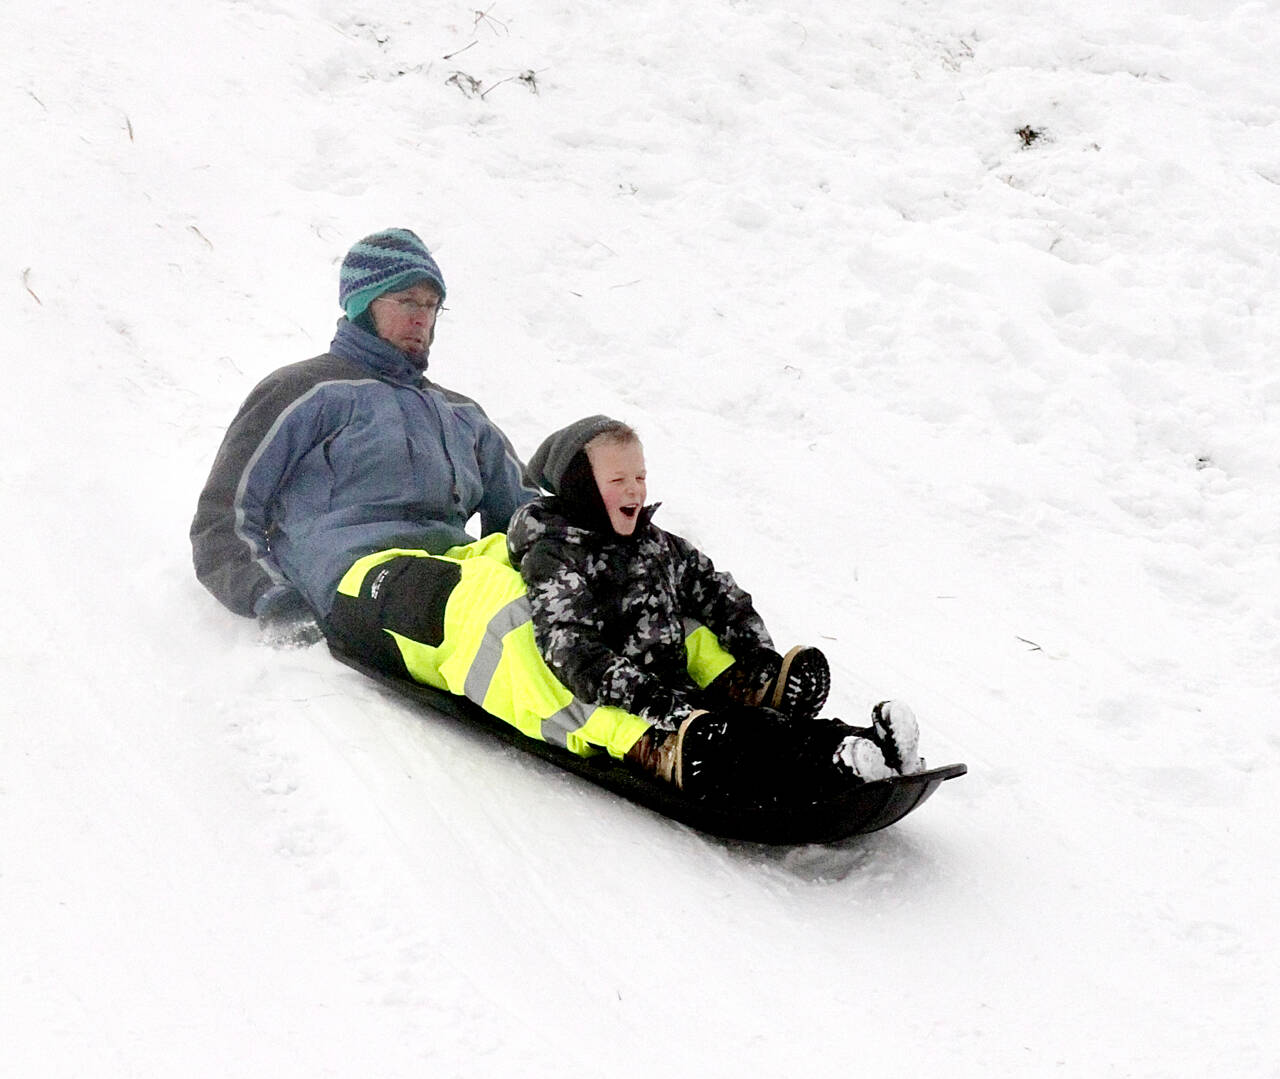 Ned Hammer and his son, Sam Lubinski-Hammer, 7, slide down a popular hill at Stevens Middle School in Port Angeles on Monday morning when the temperature was 19 degrees. (Dave Logan/for Peninsula Daily News)